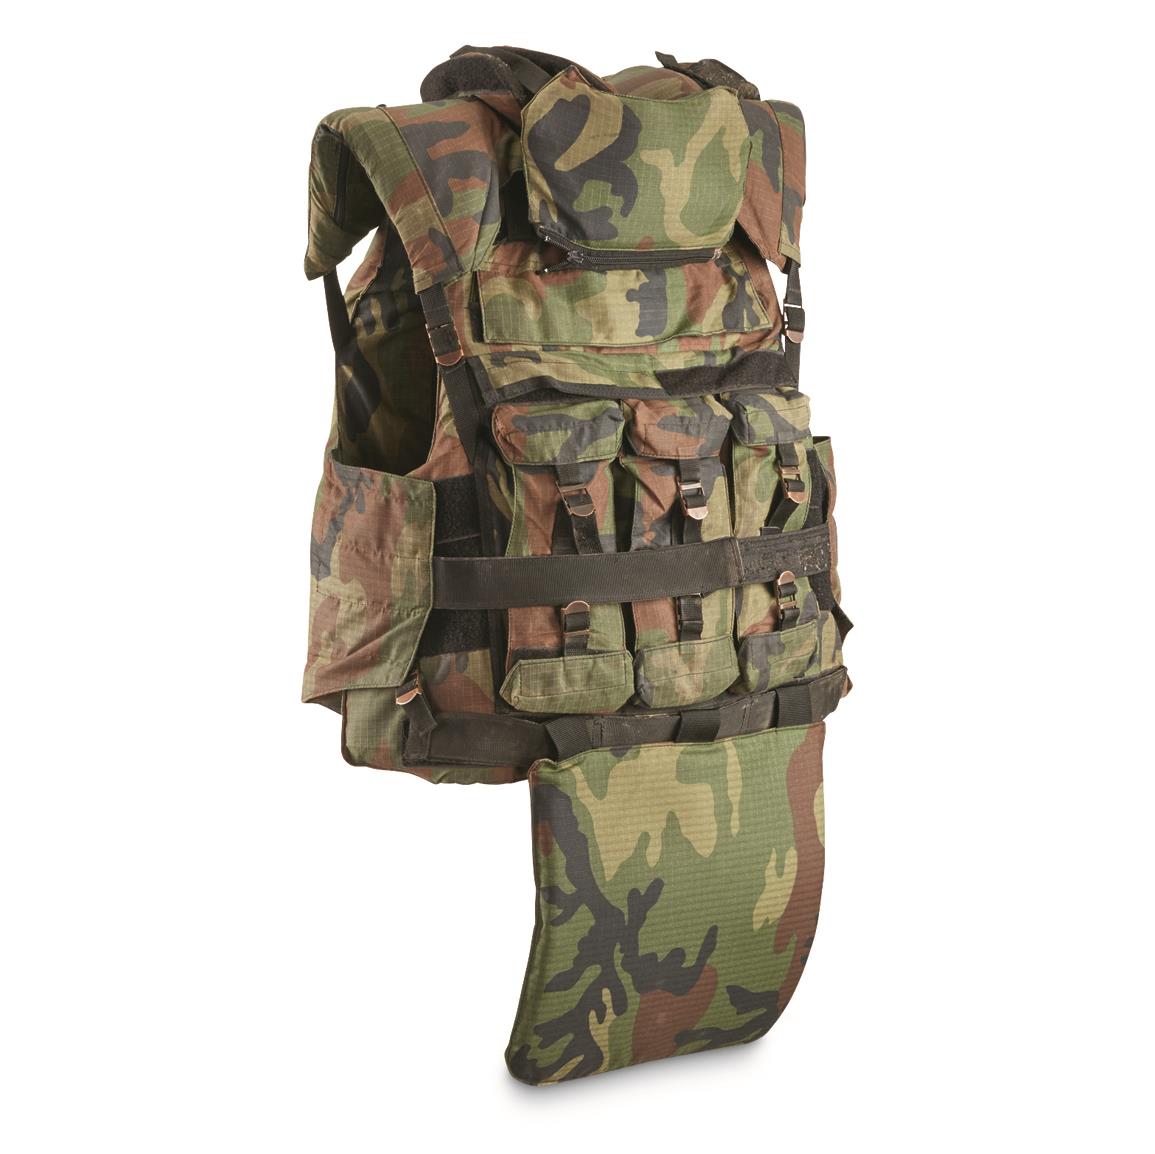 Czech Military Surplus Ballistic Vest with Kevlar, Used - 700843, Military Field Gear at ...